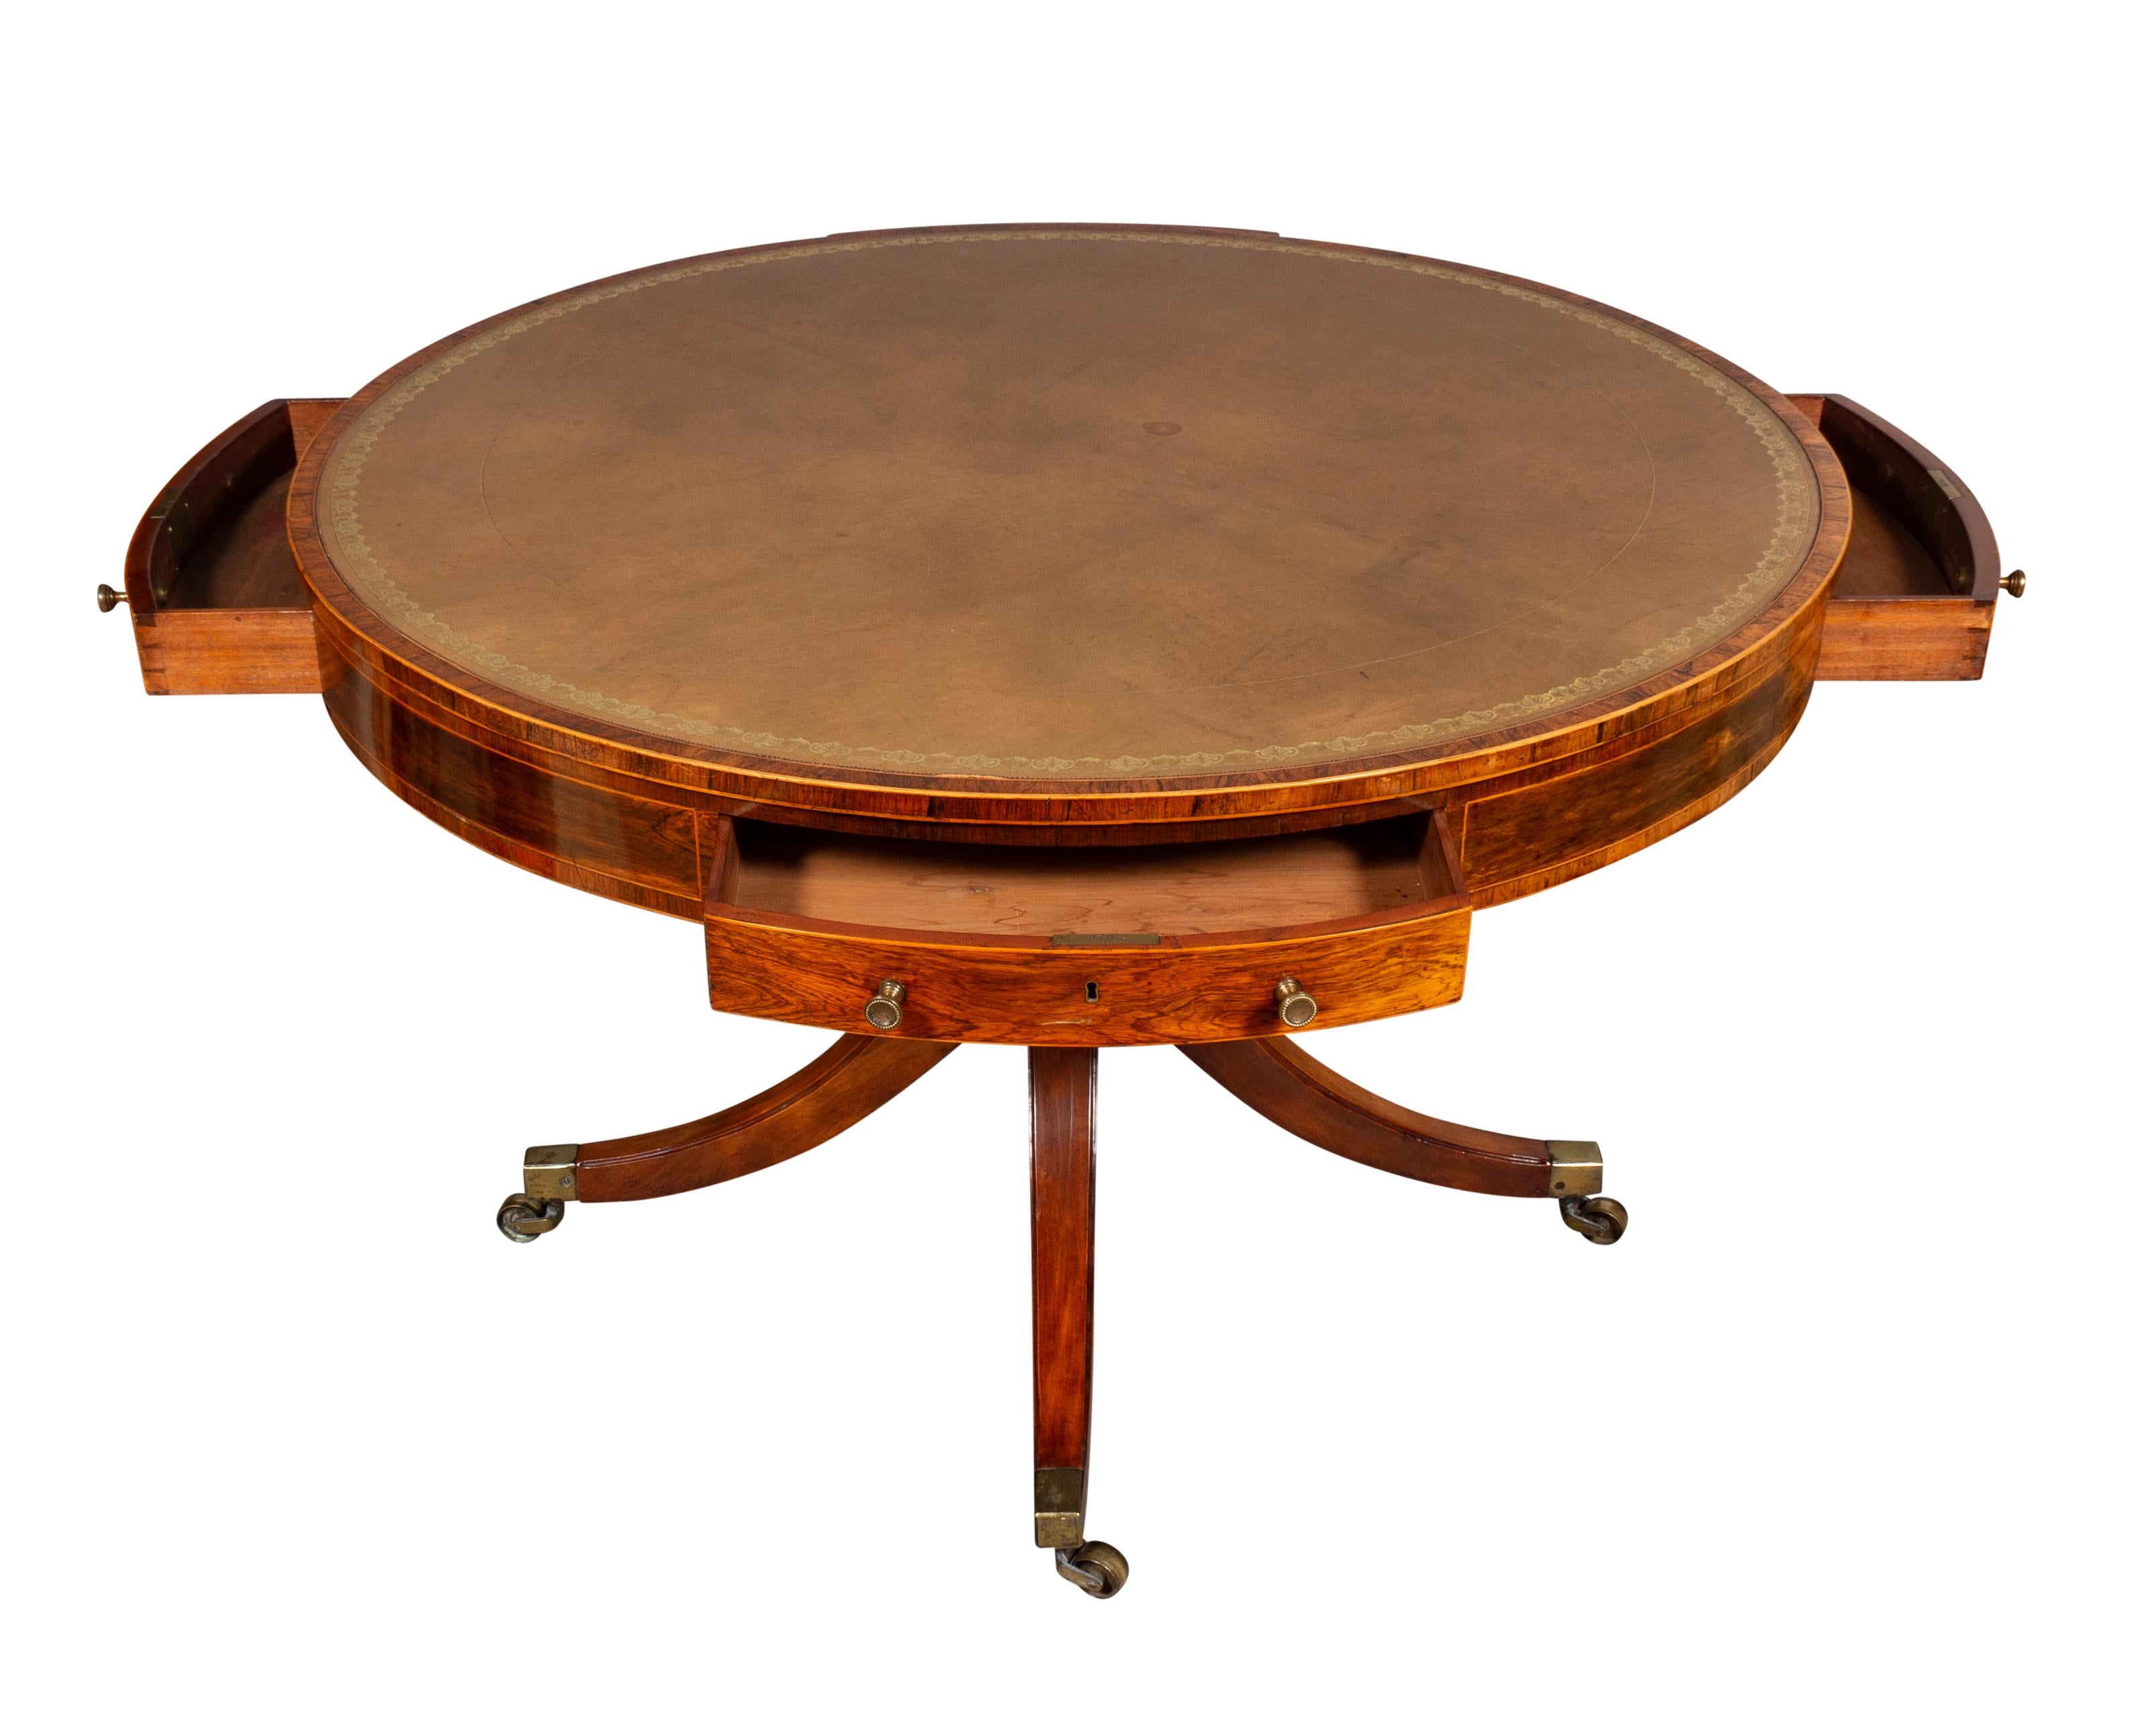 Late Regency Mahogany And Rosewood Drum Table In Good Condition For Sale In Essex, MA